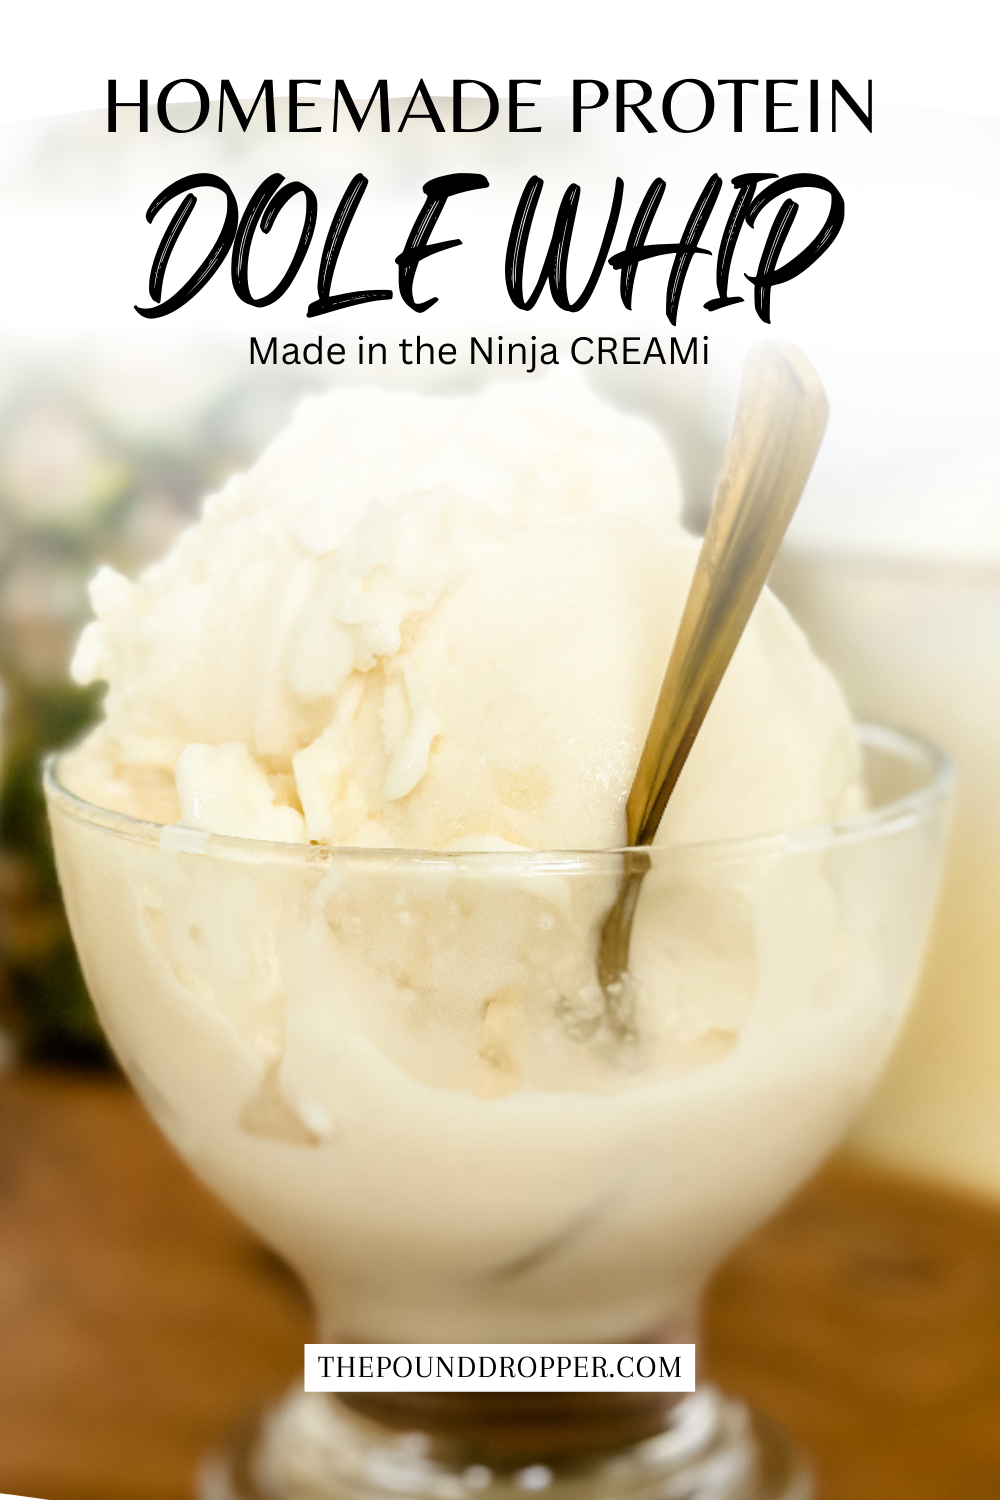 This Homemade Protein Dole Whip in the Ninja CREAMi is a healthy protein packed Disney-Inspired Dole Whip Ice Cream! This healthier twist on the classic Dole Whip from Disneyland can be made at home using the Ninja CREAMi and is packed with protein so it's a filling and super refreshing! via @pounddropper